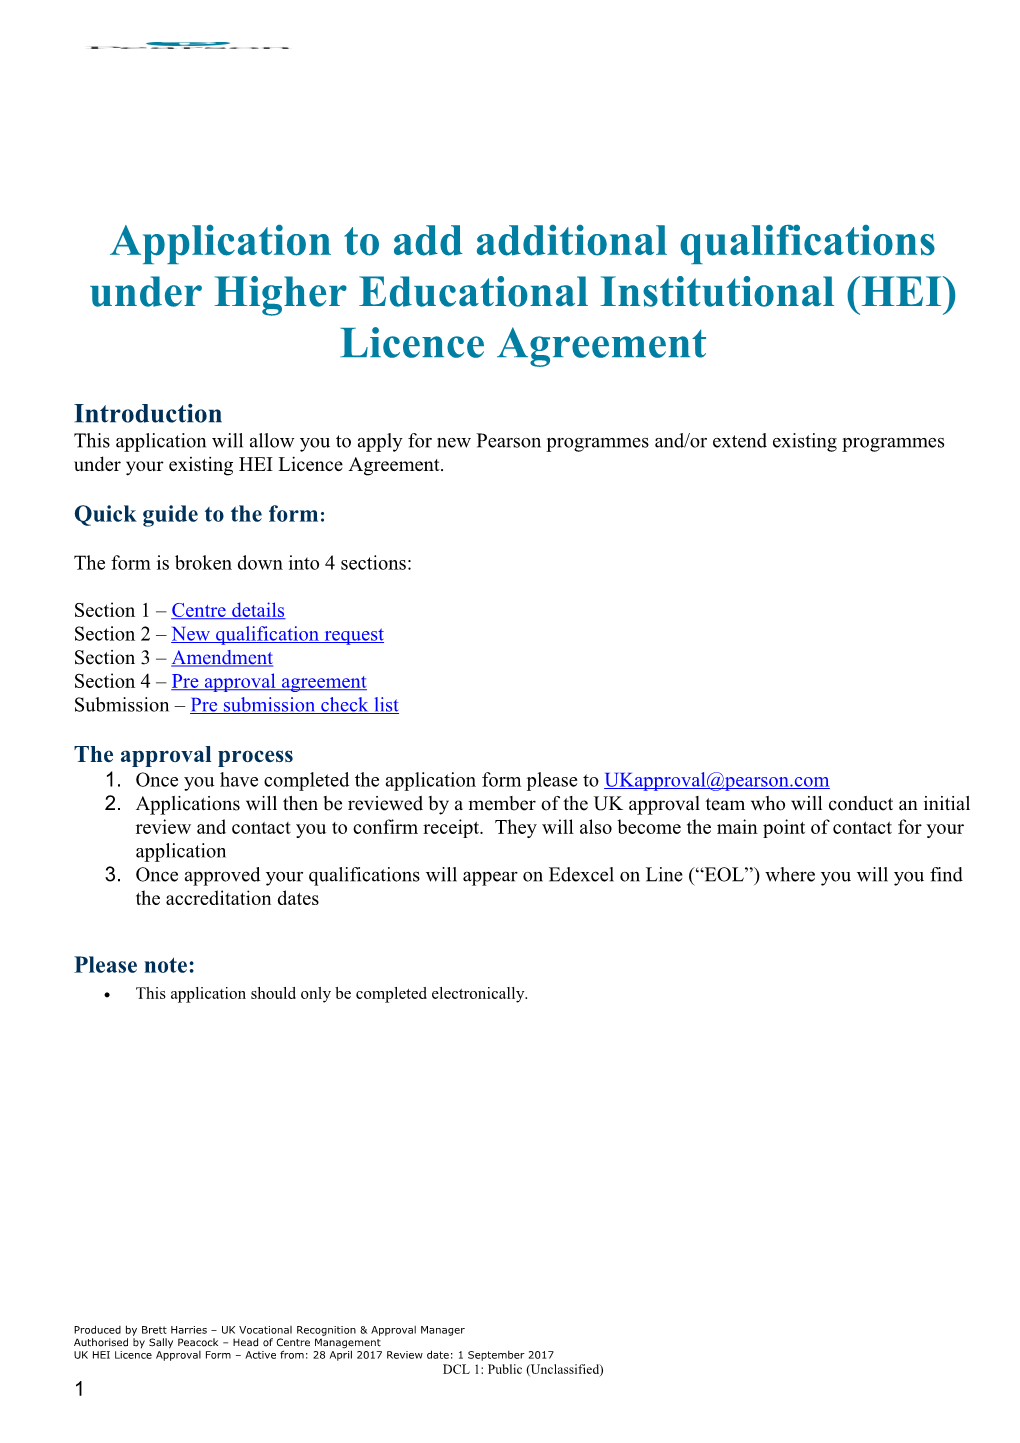 Application to Add Additional Qualifications Under Higher Educational Institutional (HEI)